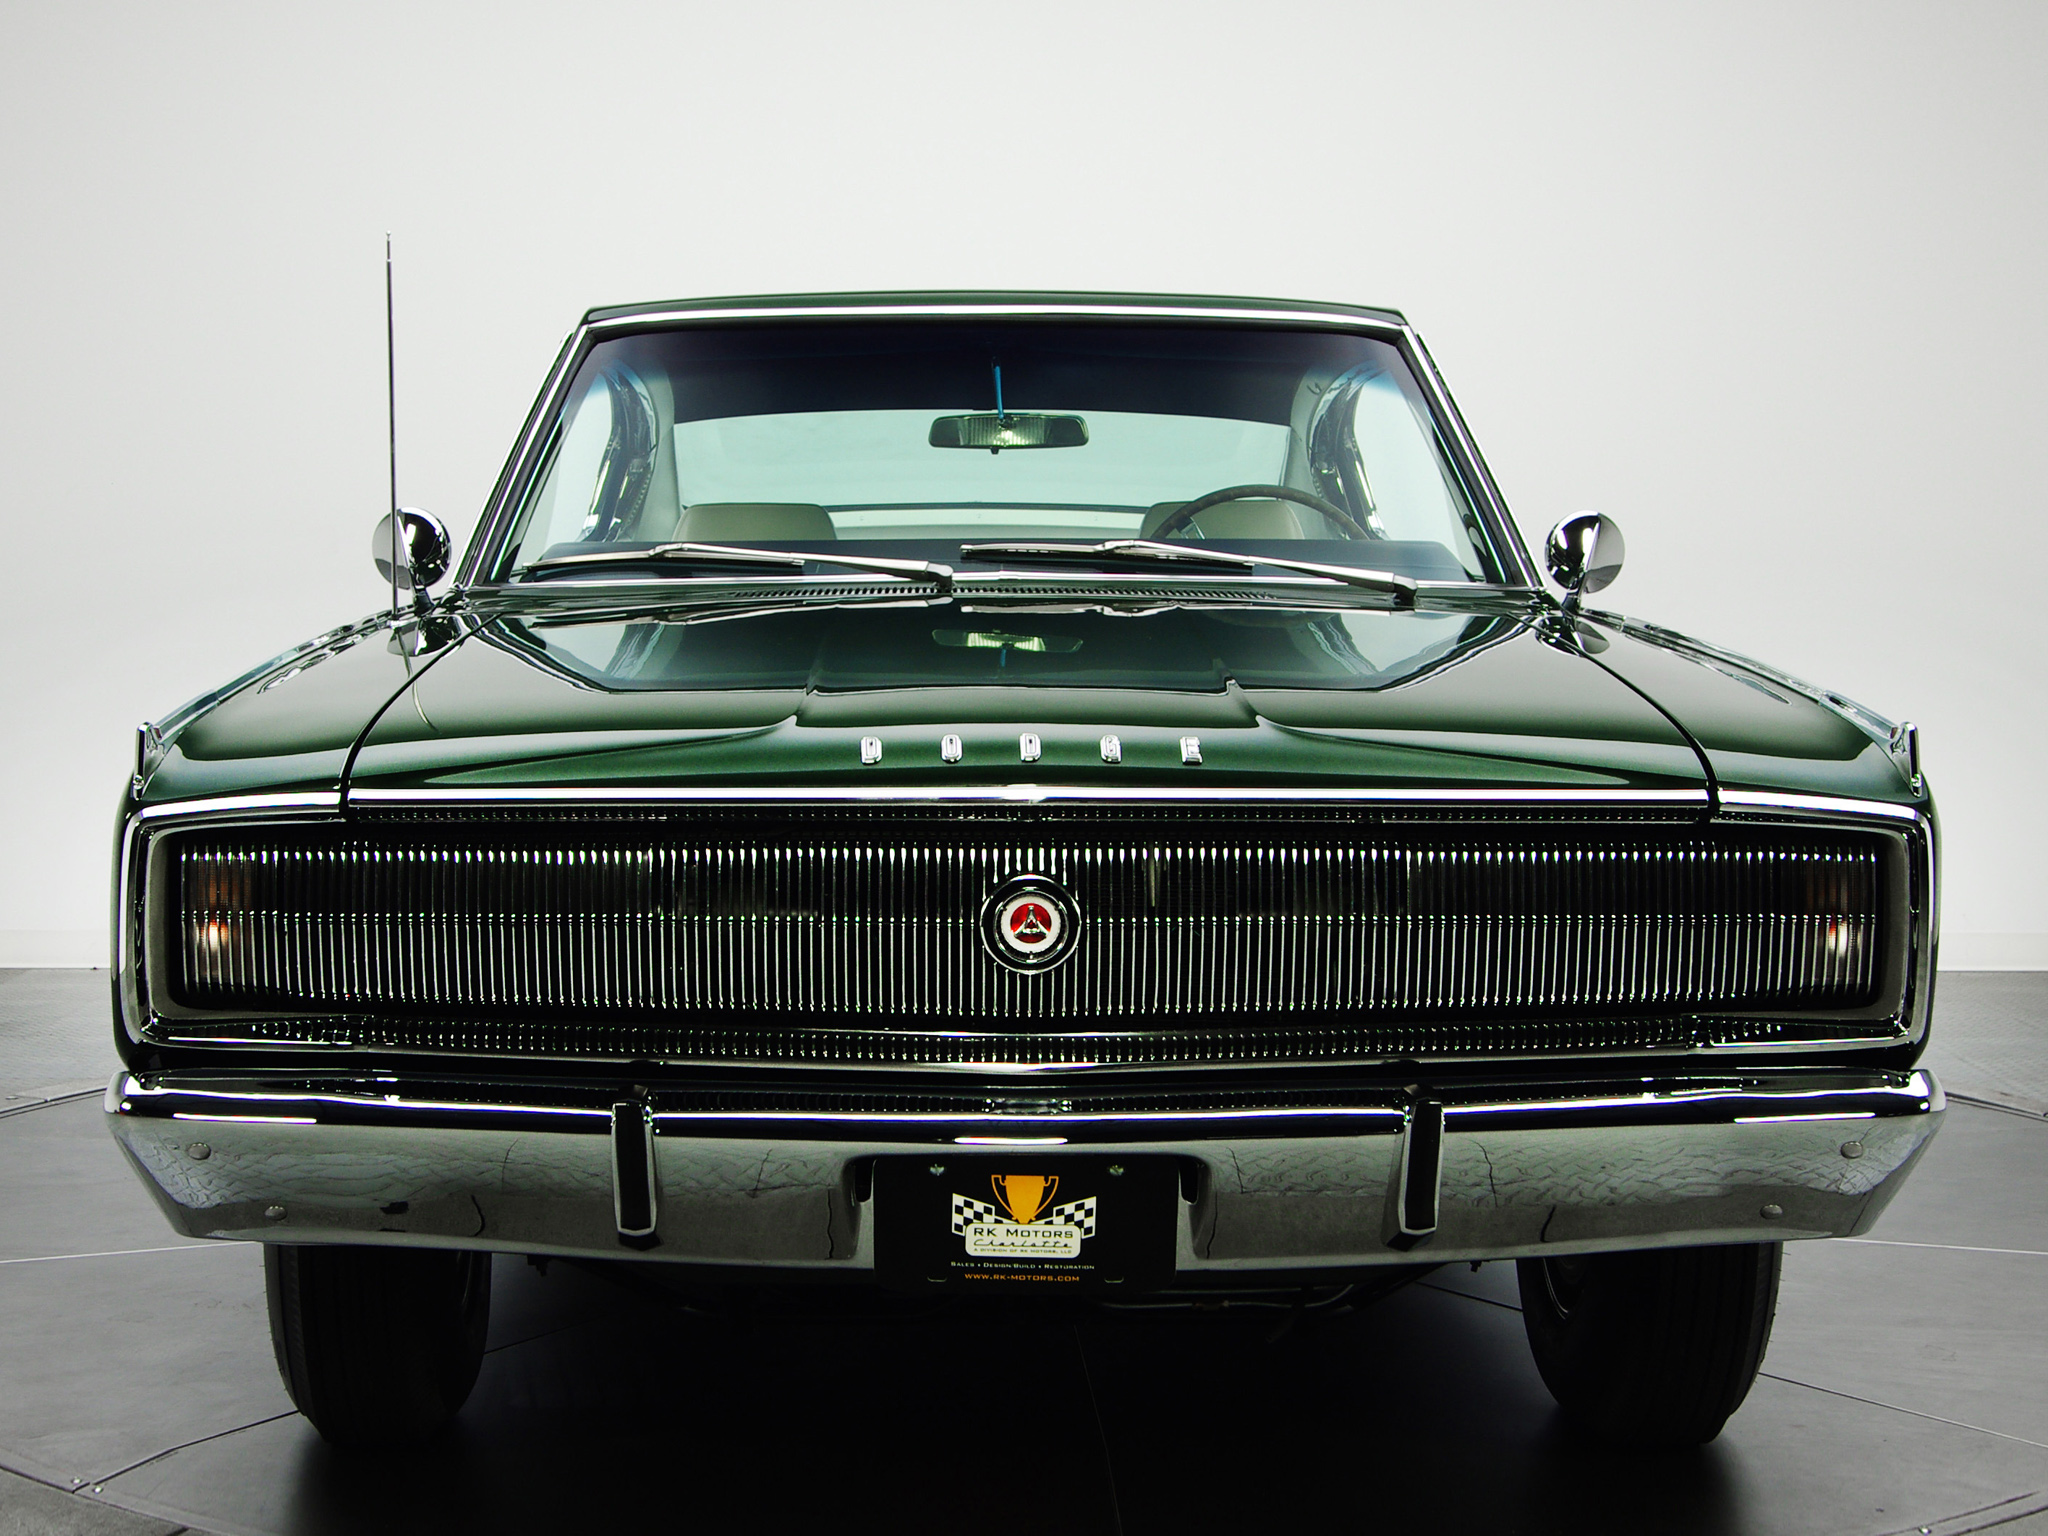 Dodge Charger R/T 426 Hemi Wallpapers